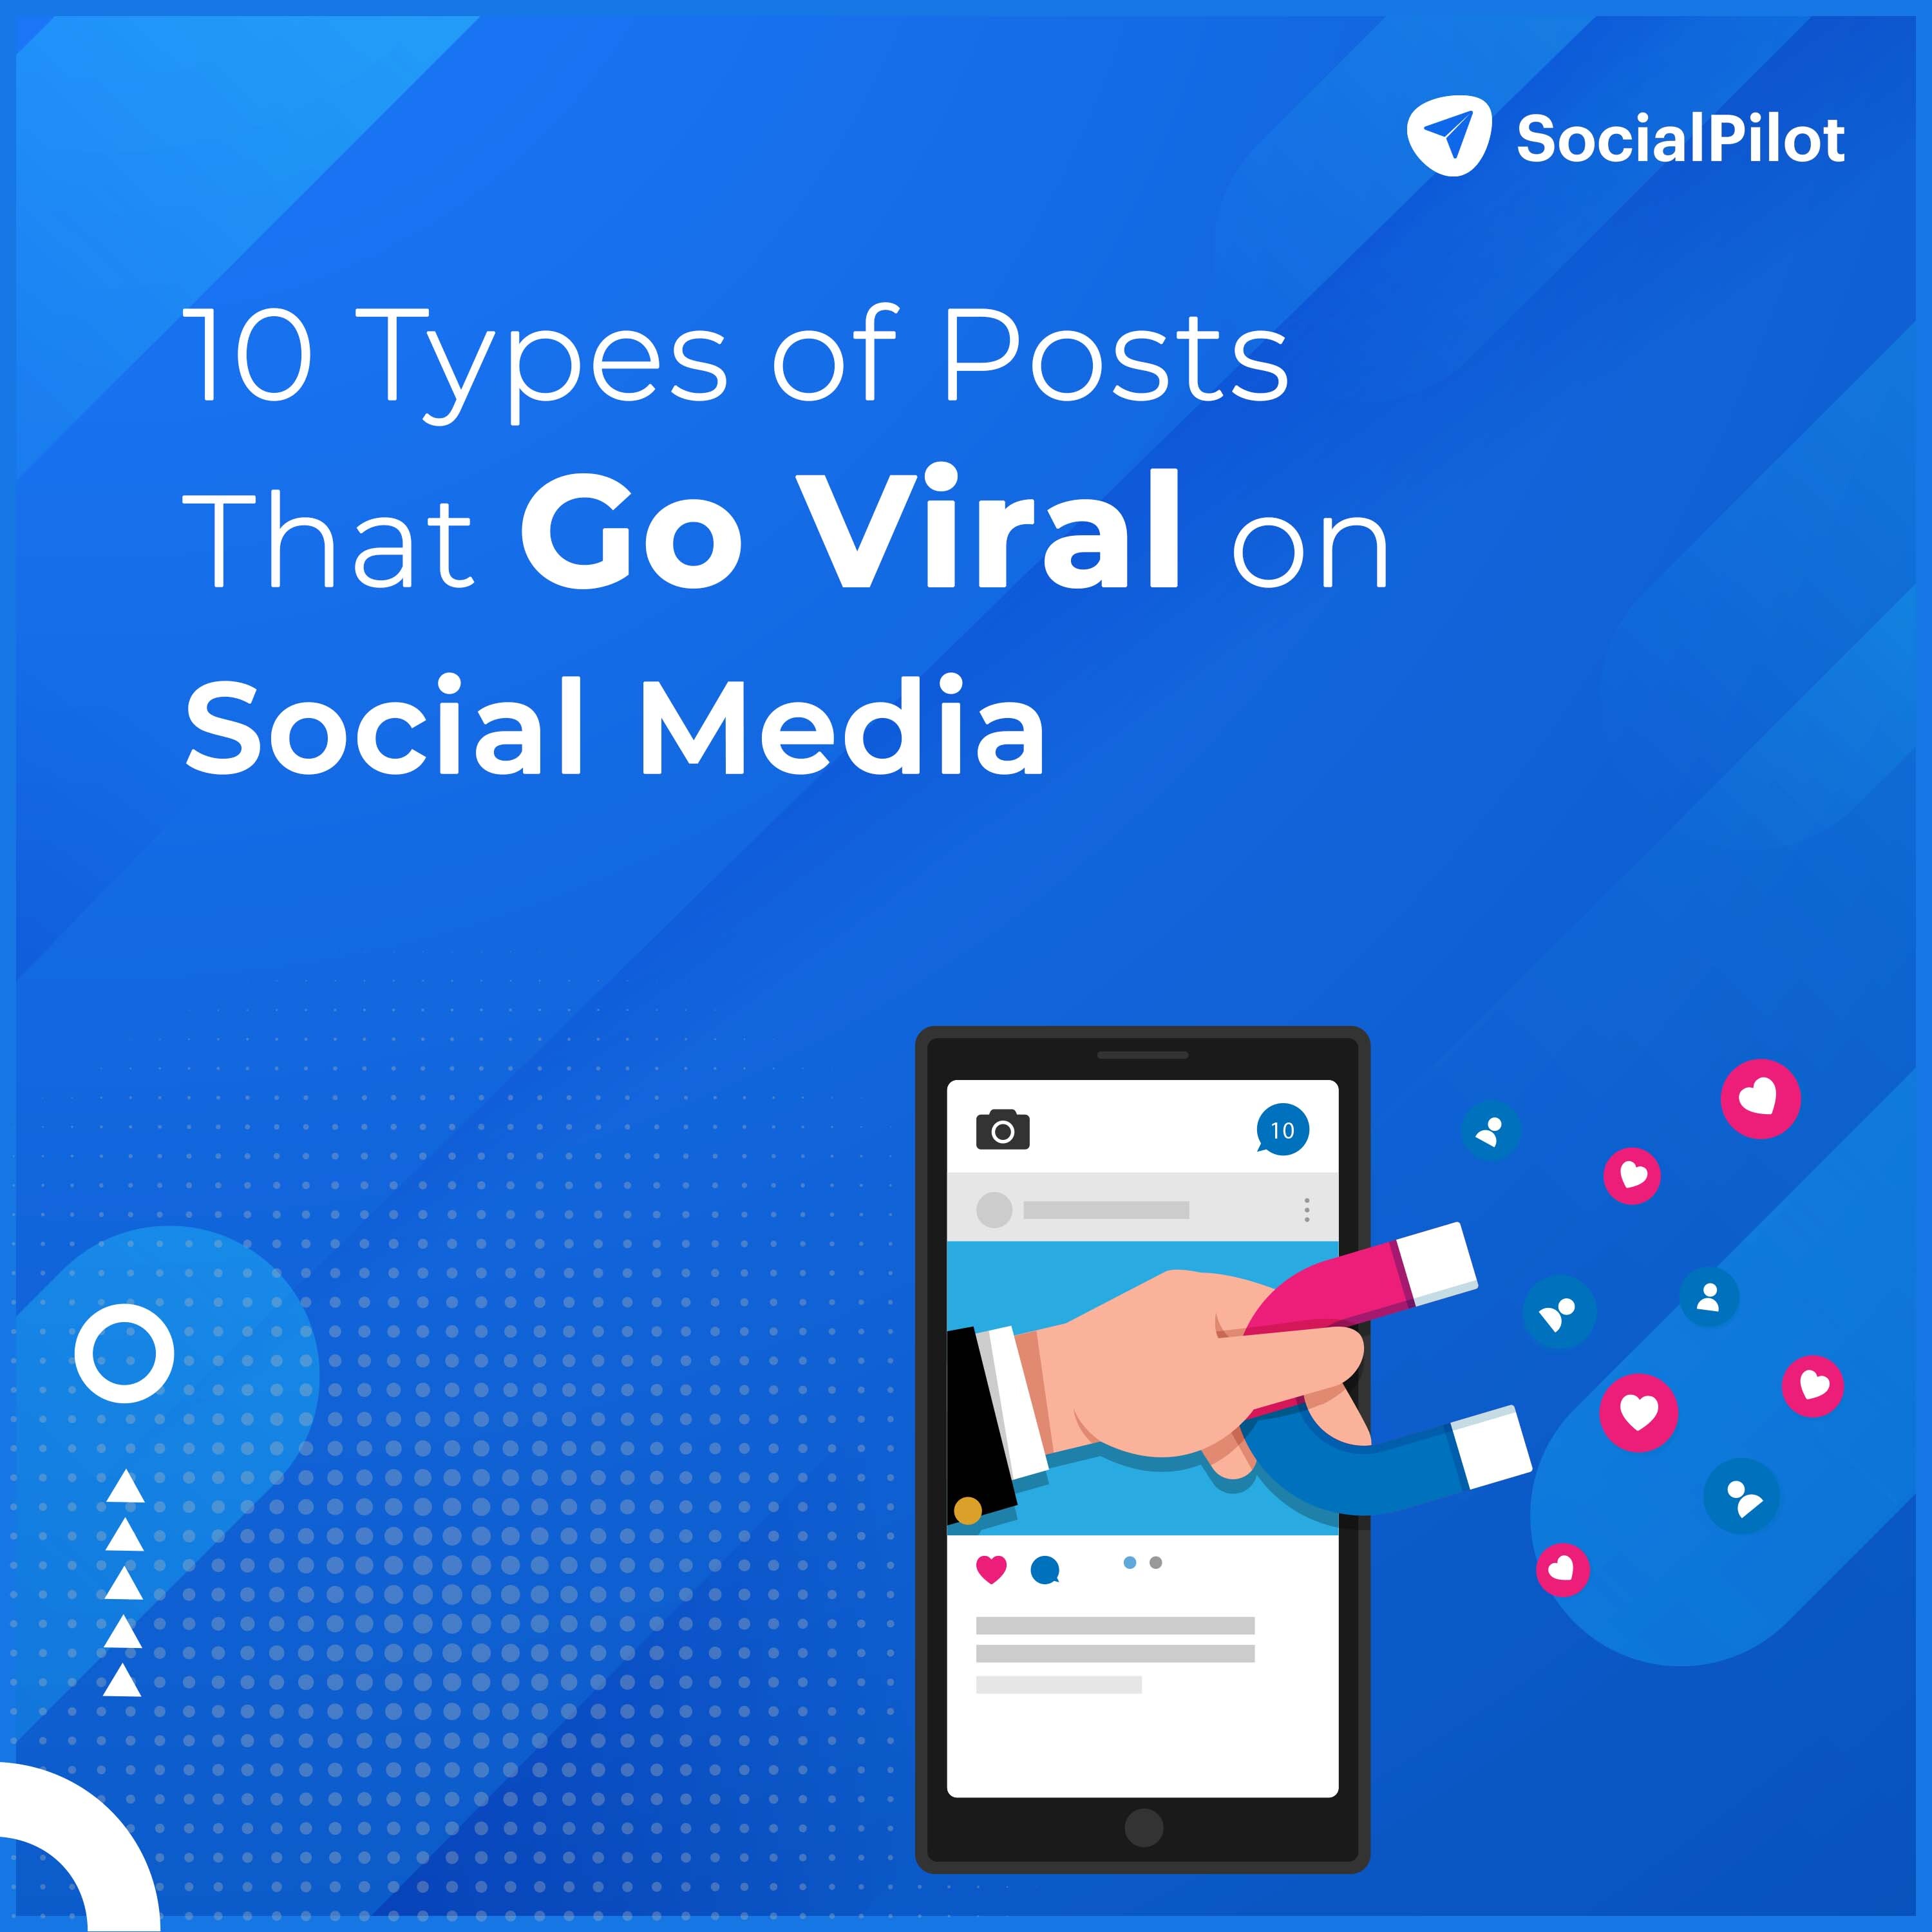 10 Types of Posts that Go Viral on Social Media